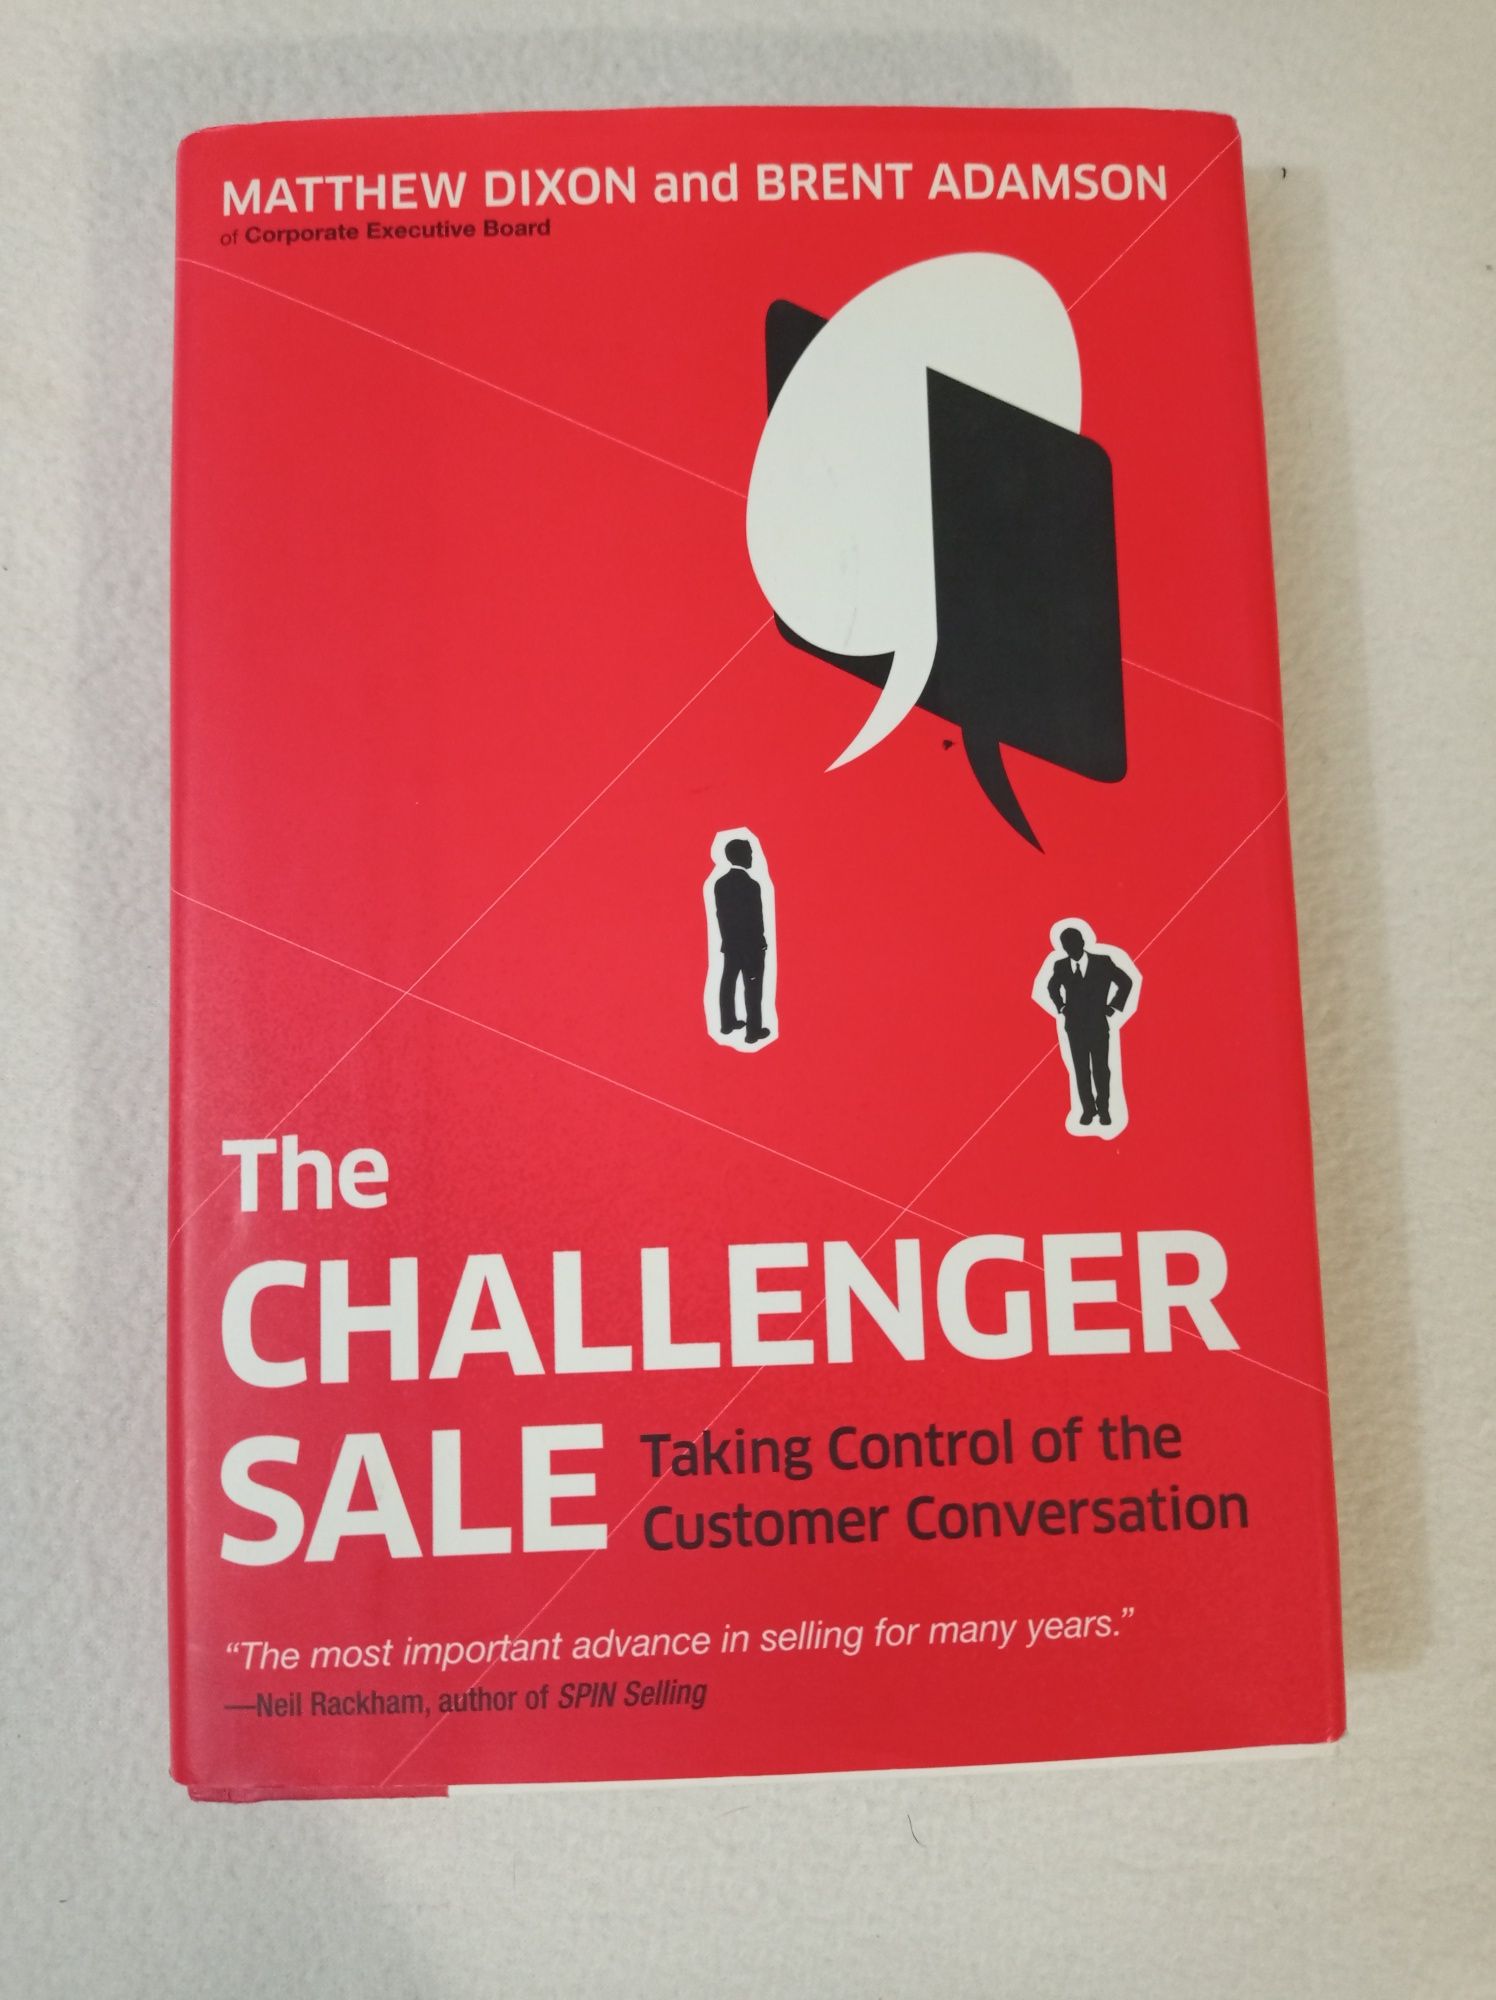 The challenger sale - taking control of customer conversation